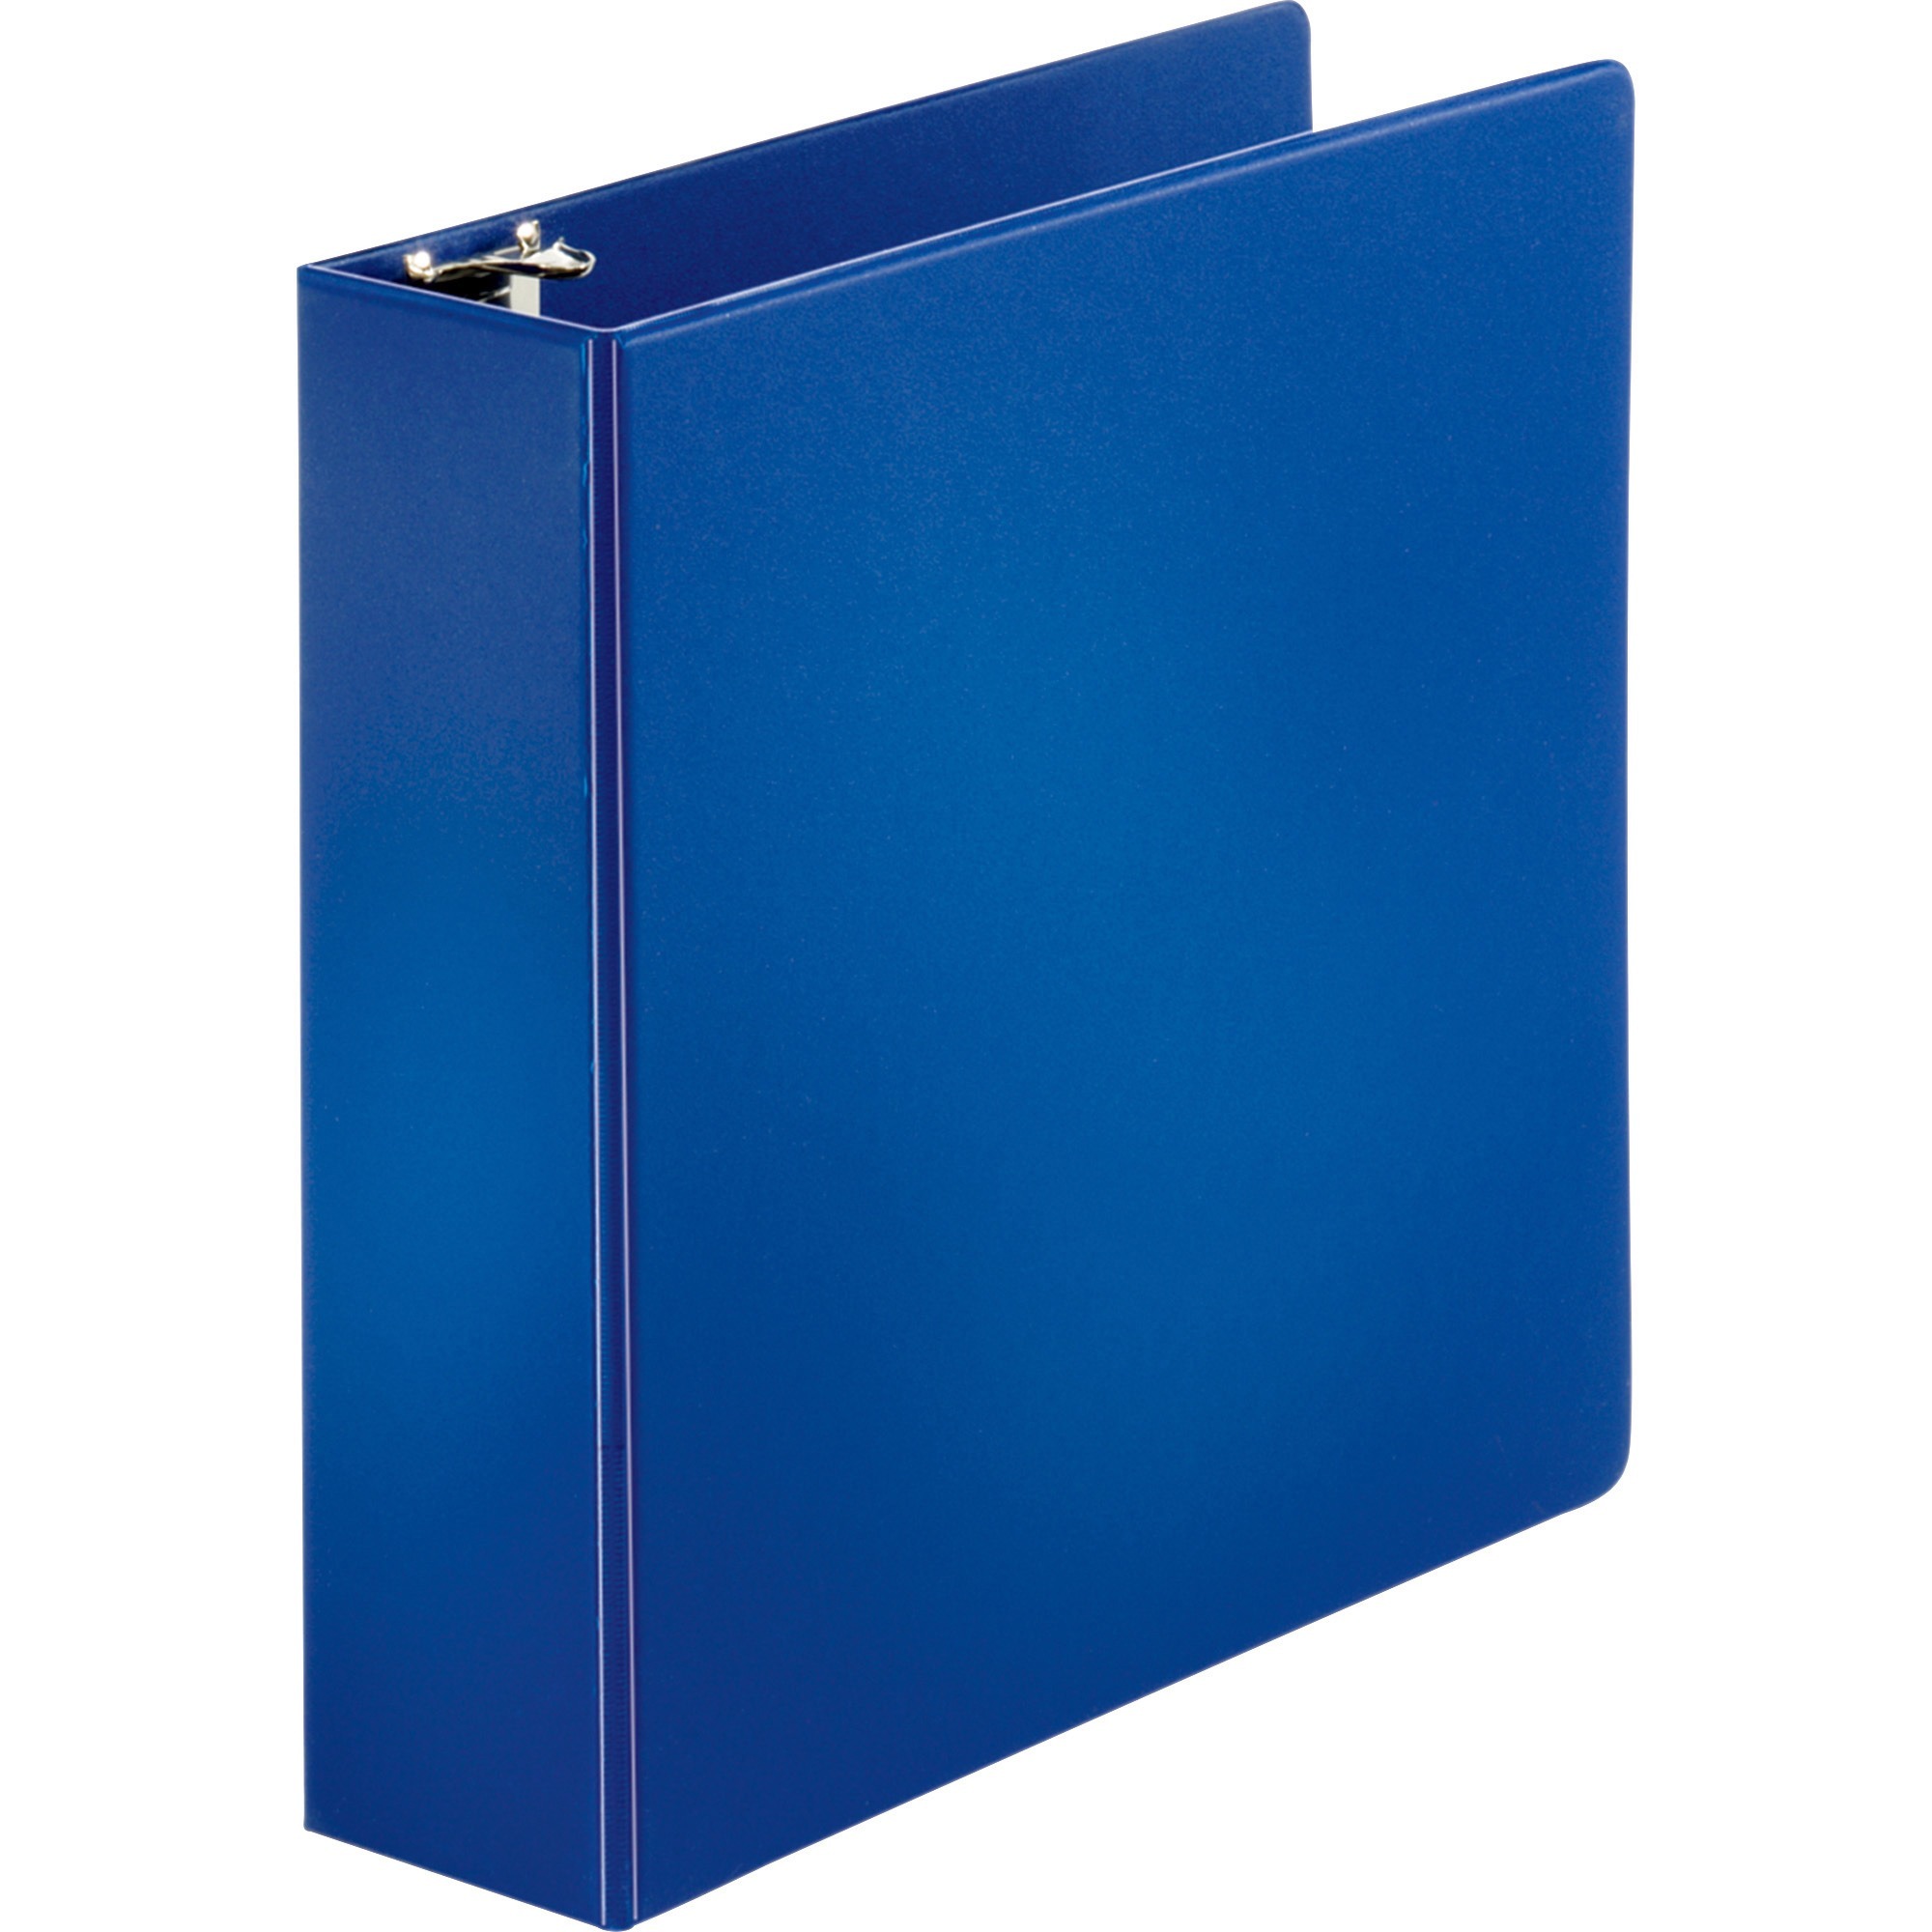 What Size Three Ring Binder Do I Need